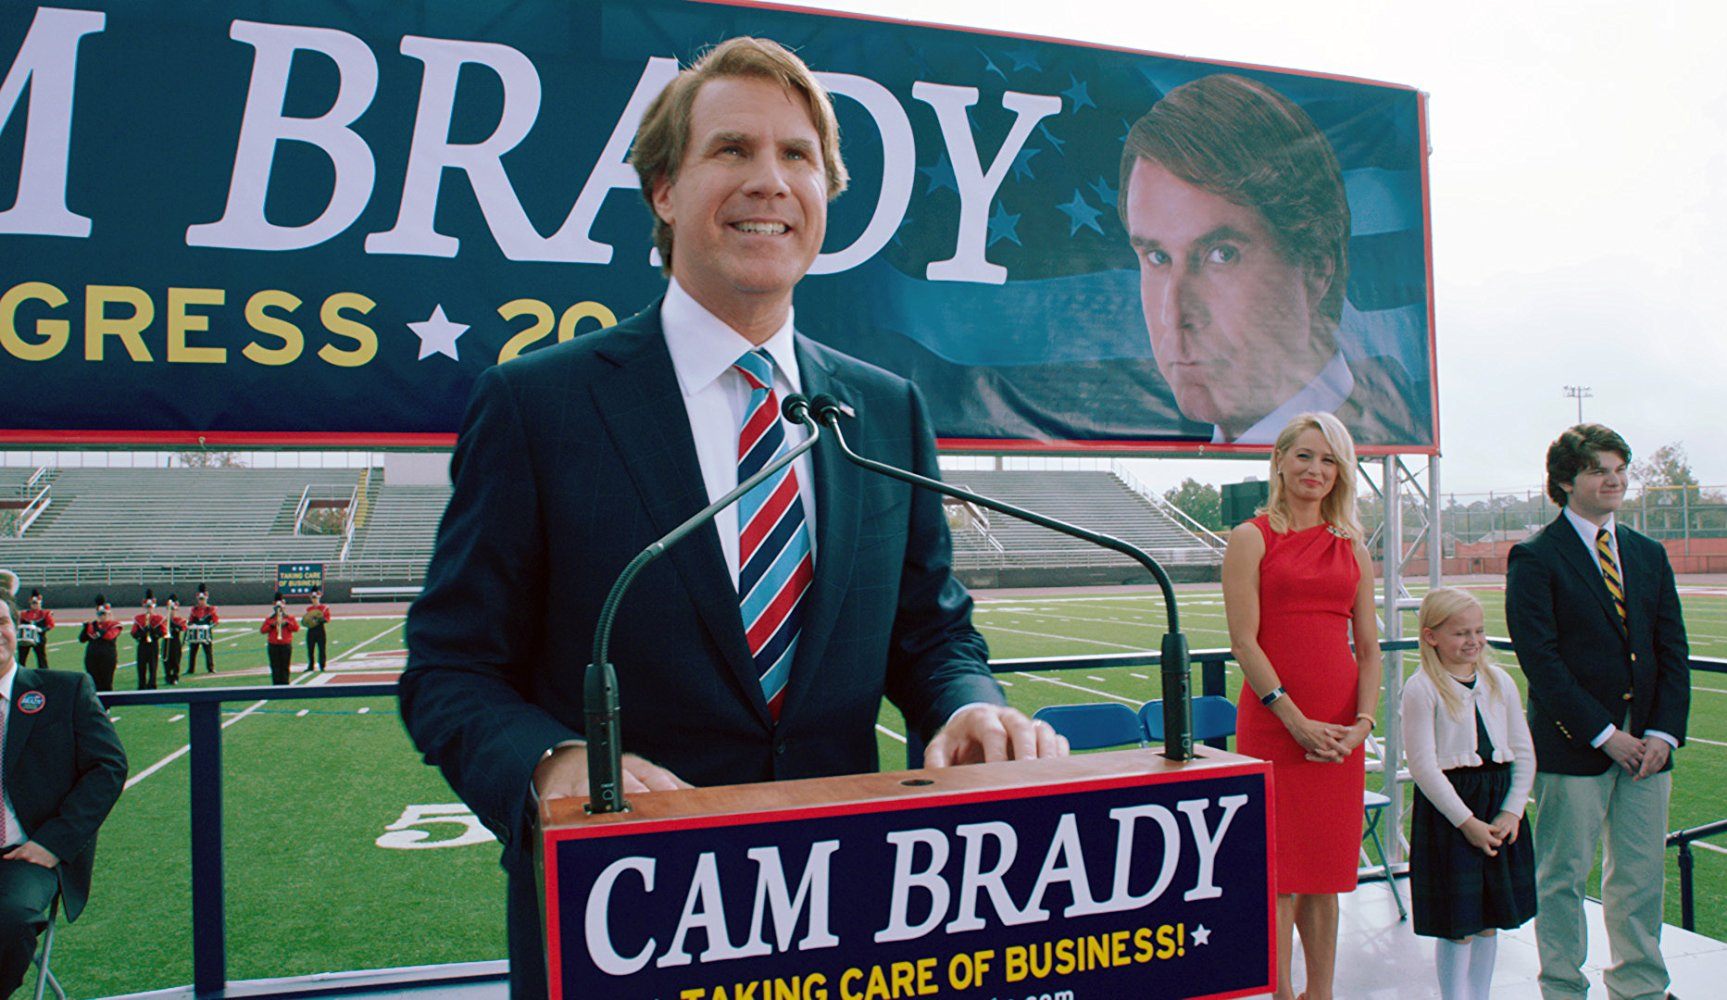 Will Ferrell as Cam Brady in The Campaign